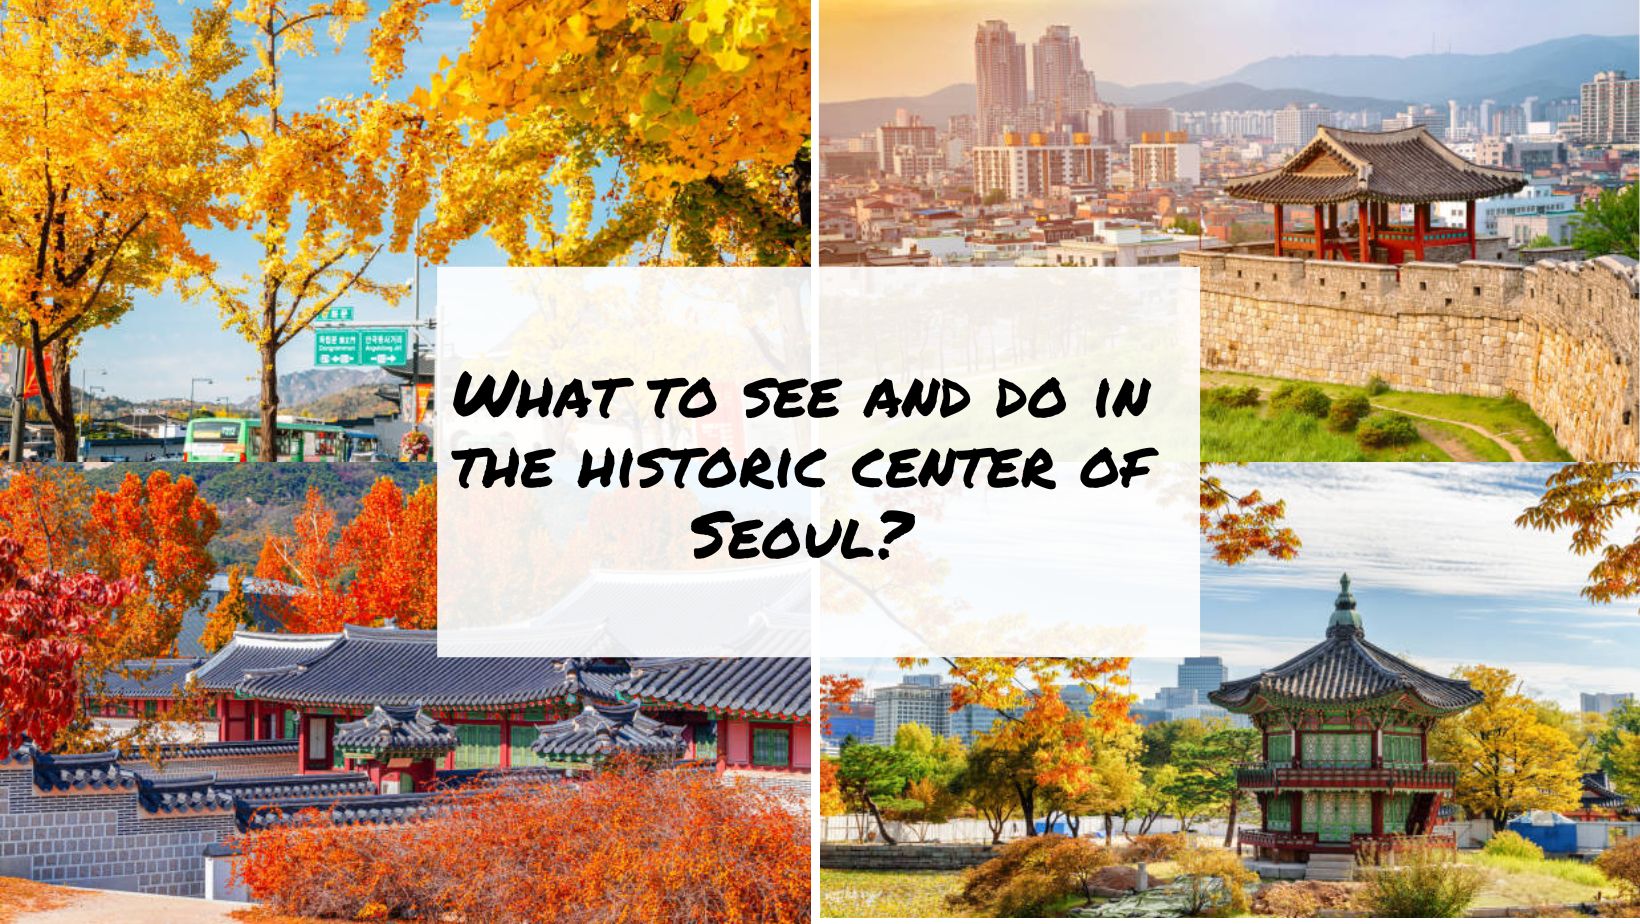 What to see and do in the historic center of Seoul